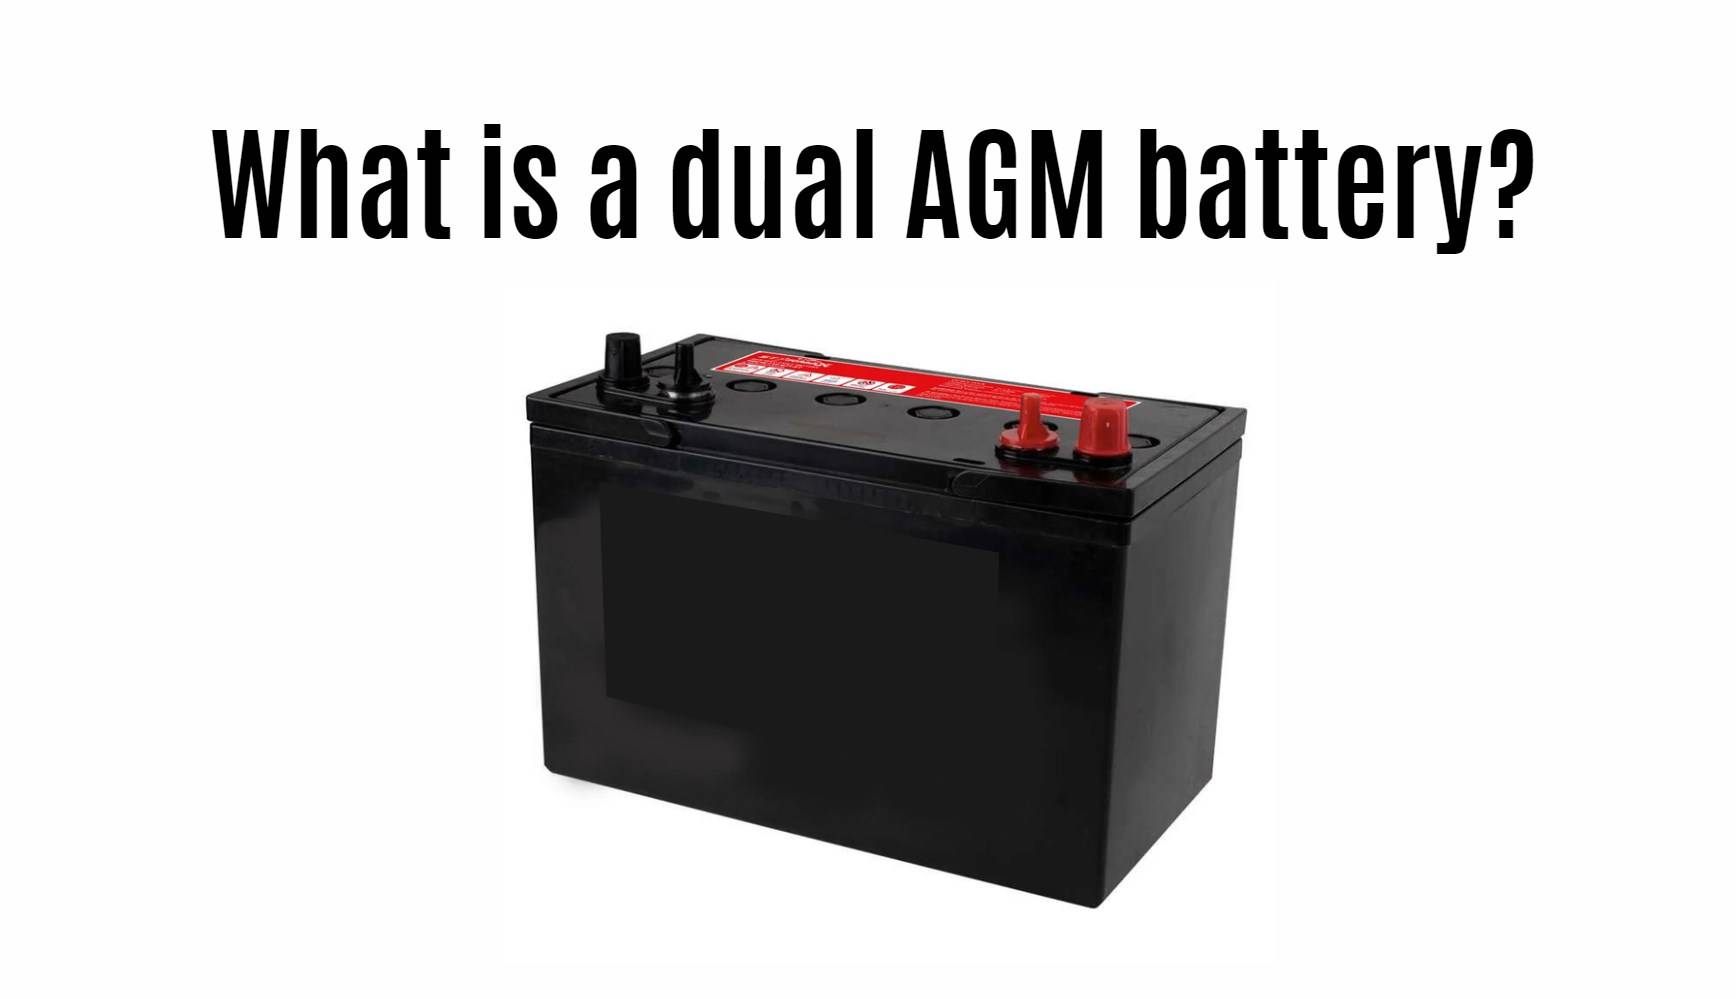 What is a dual AGM battery?